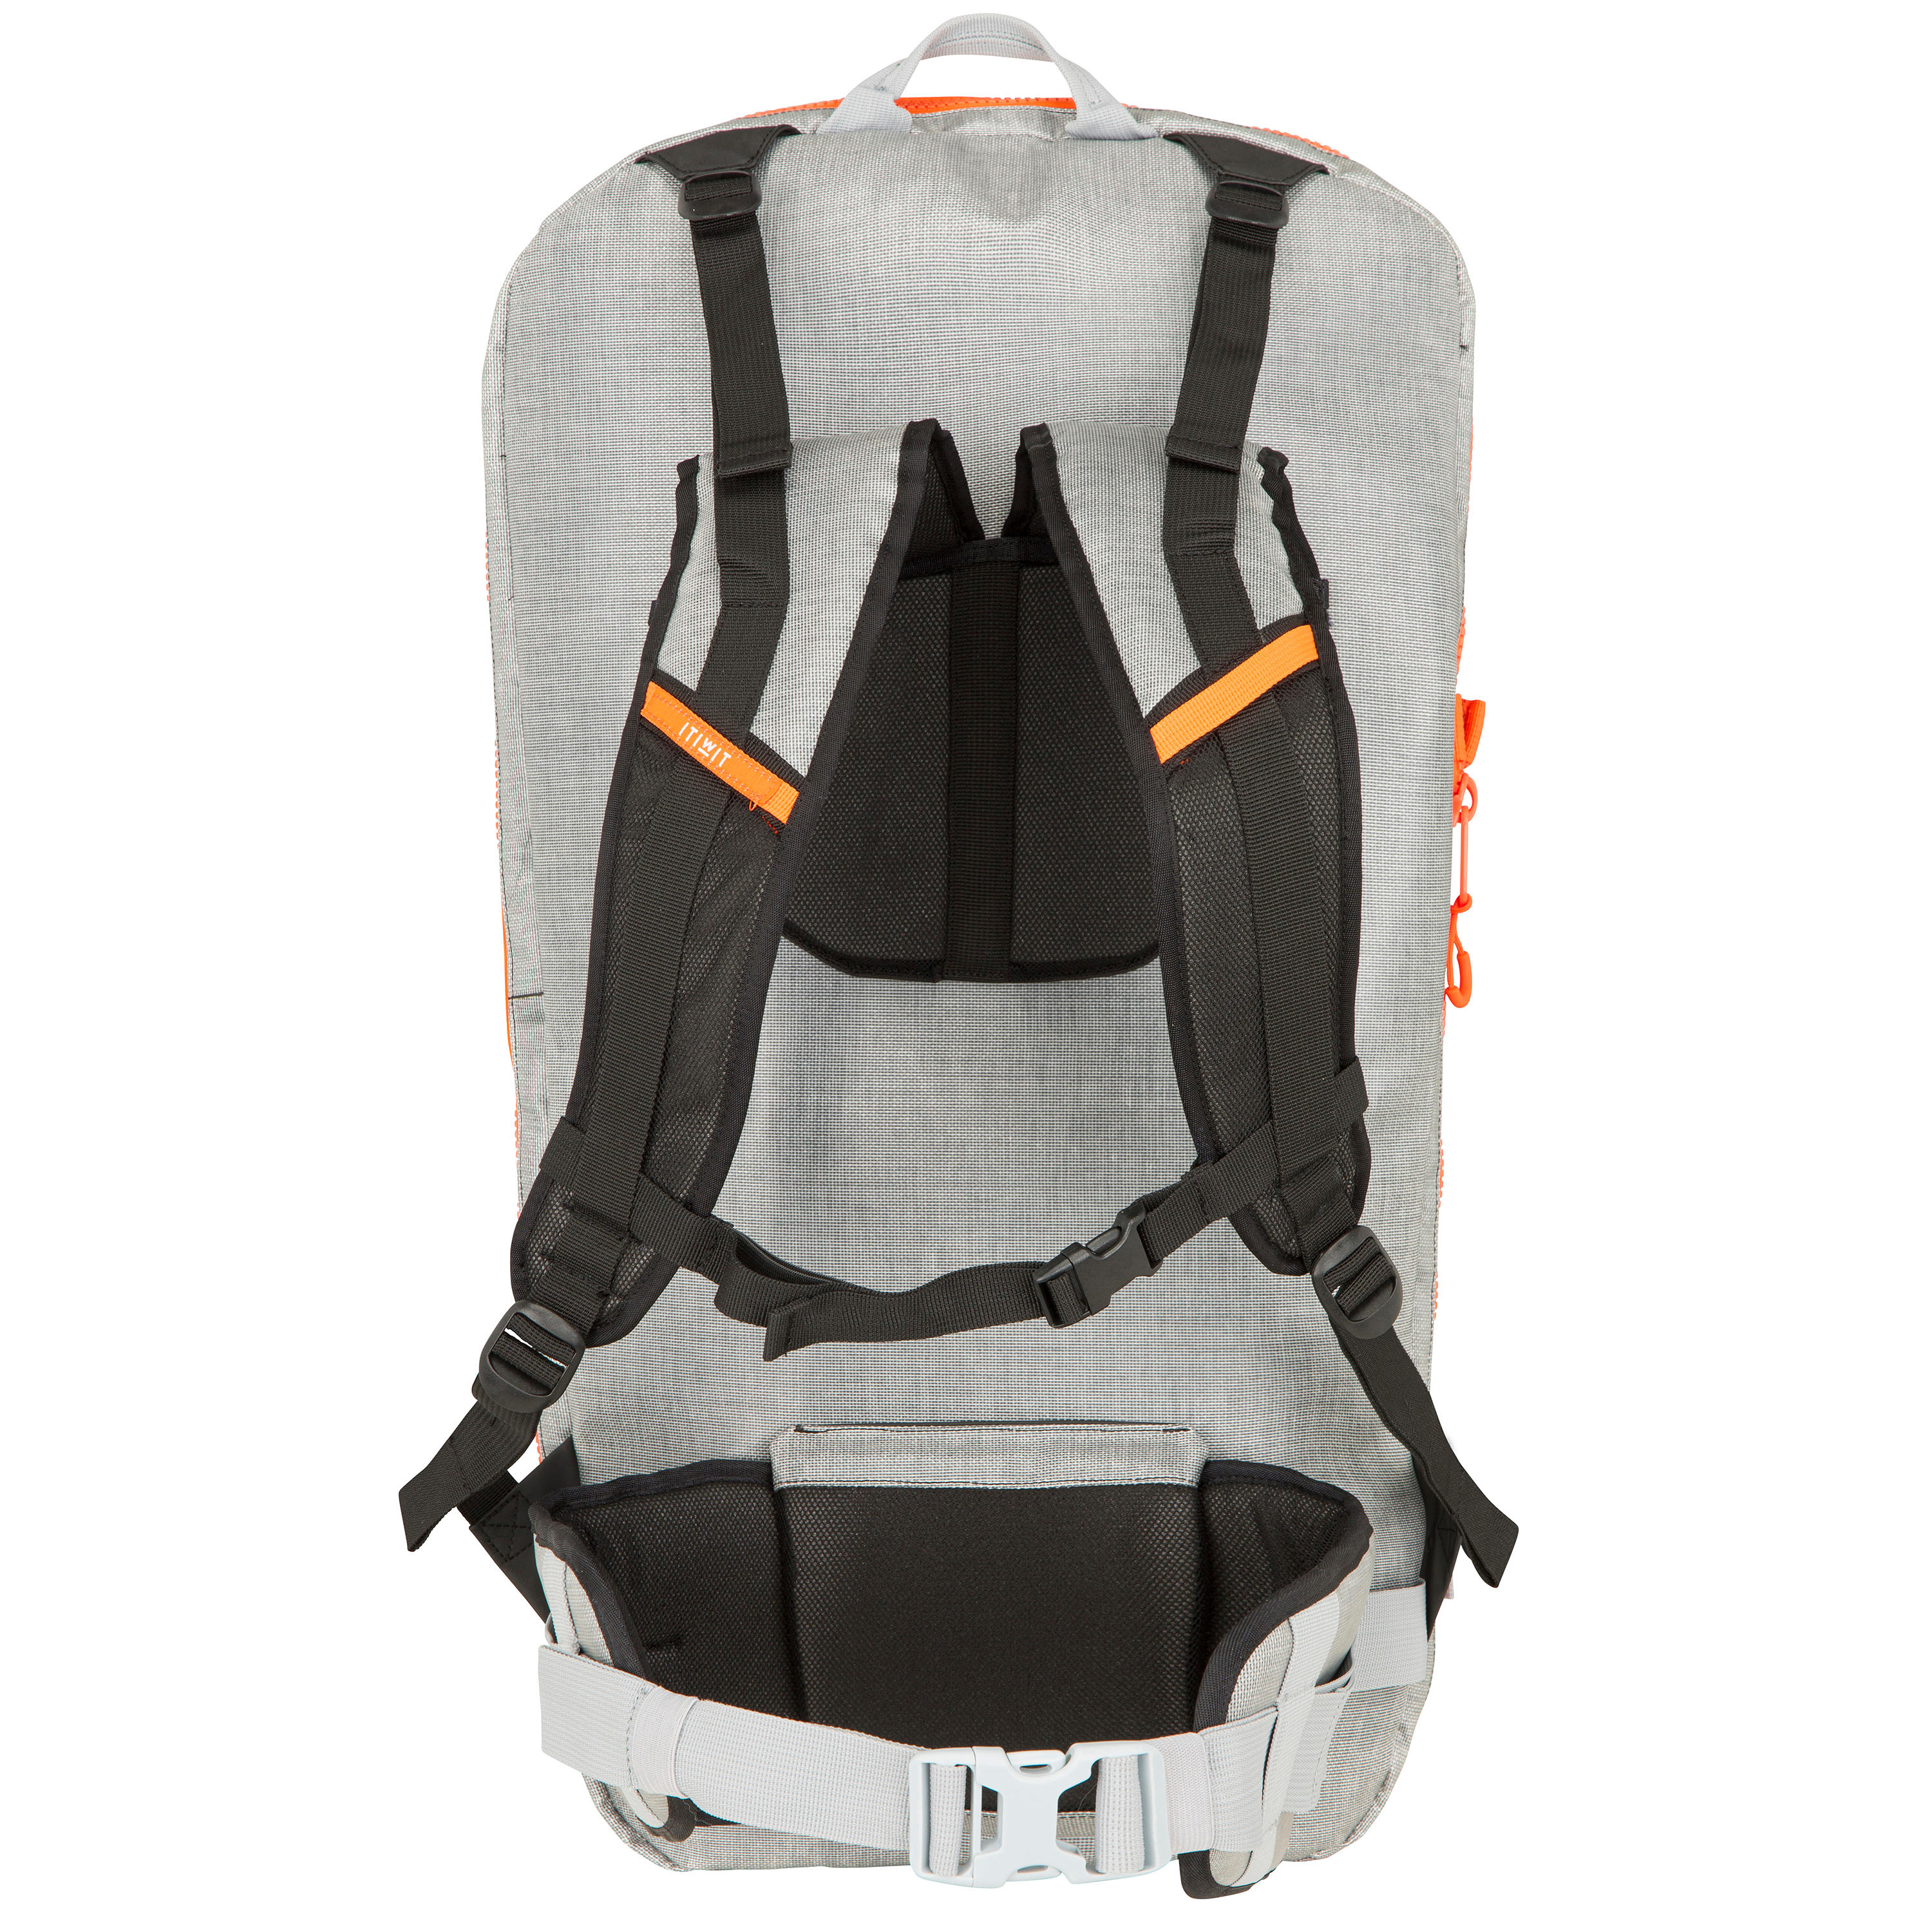 Stand-Up Paddle Convertible Waterproof Backpack 12/21